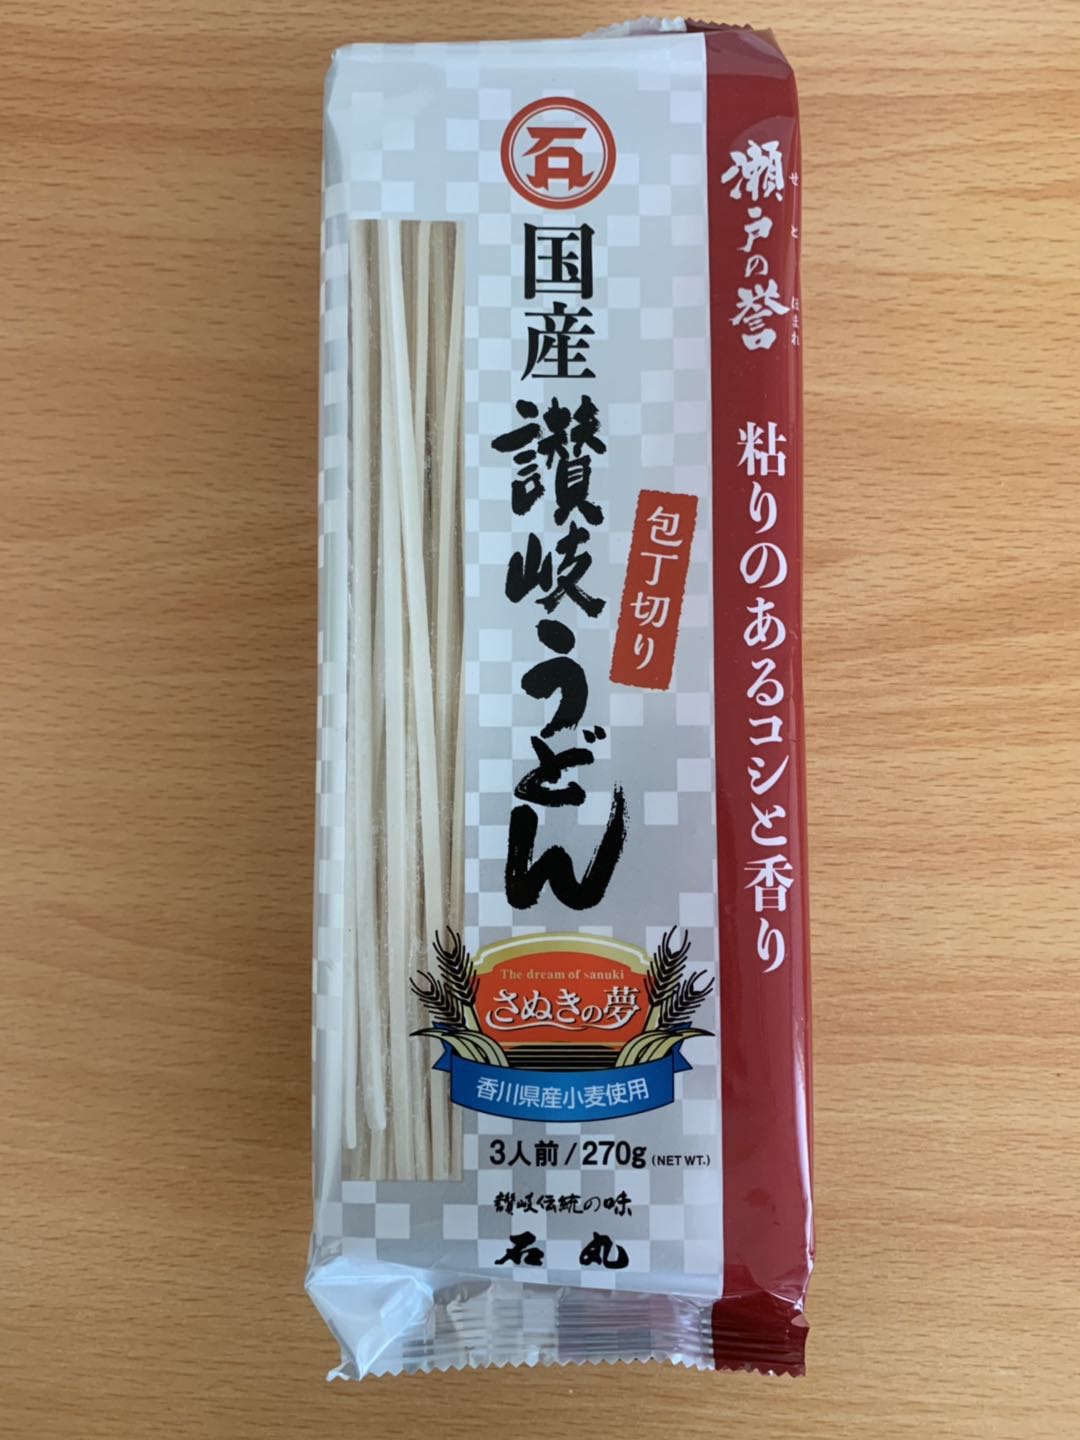 Japanese traditional noodles (handmade)